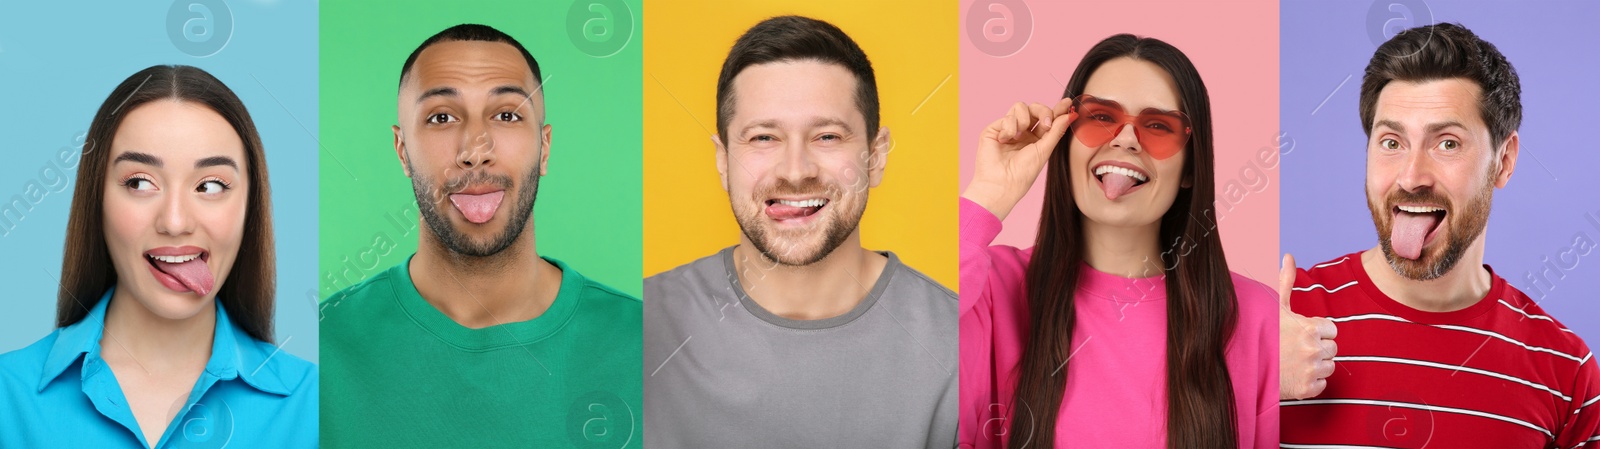 Image of Collage with photos of people showing their tongues on different color backgrounds